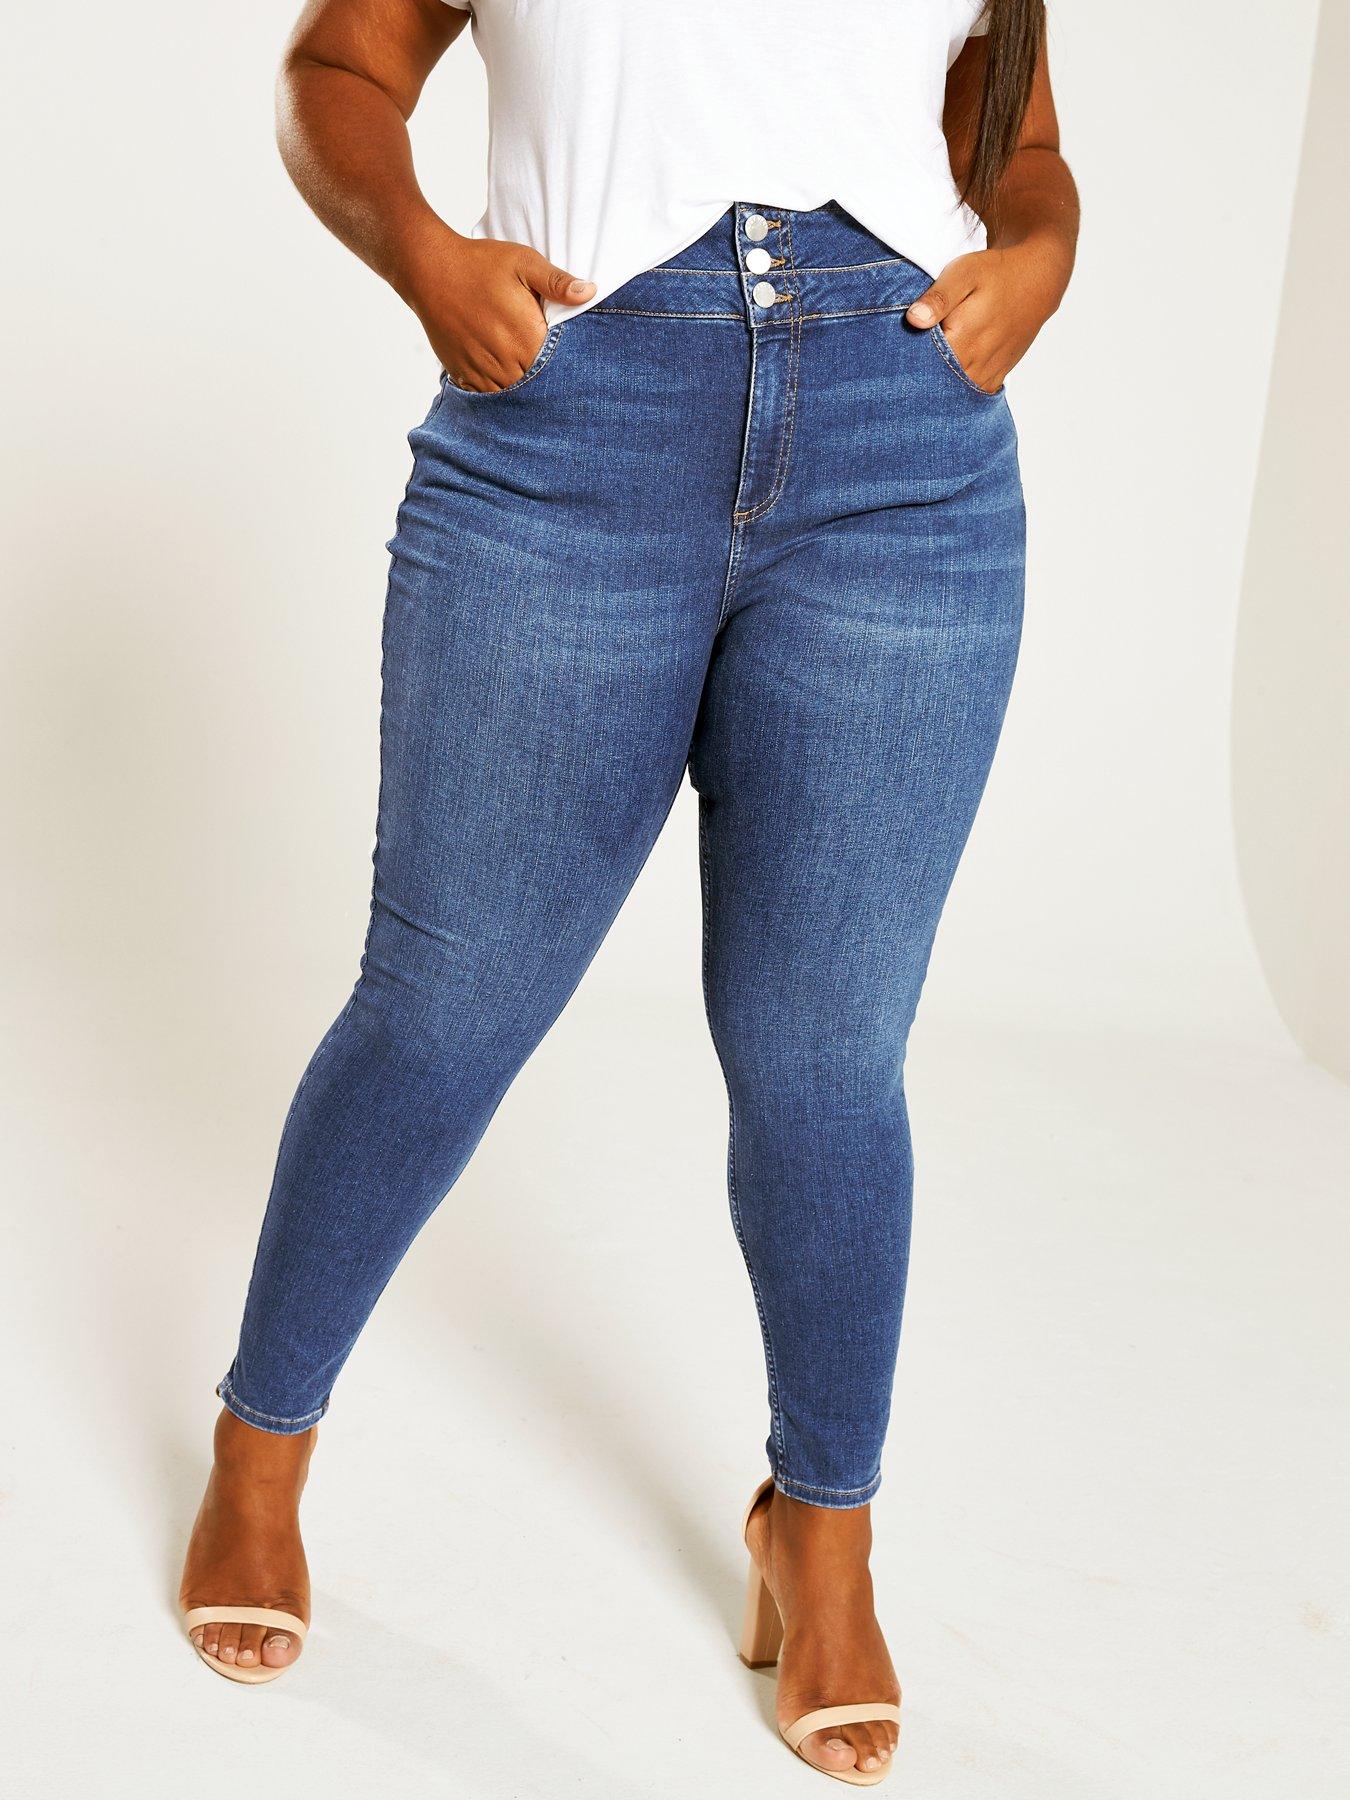 Plus Size Jeans | Women's Curved Jeans Very.co.uk